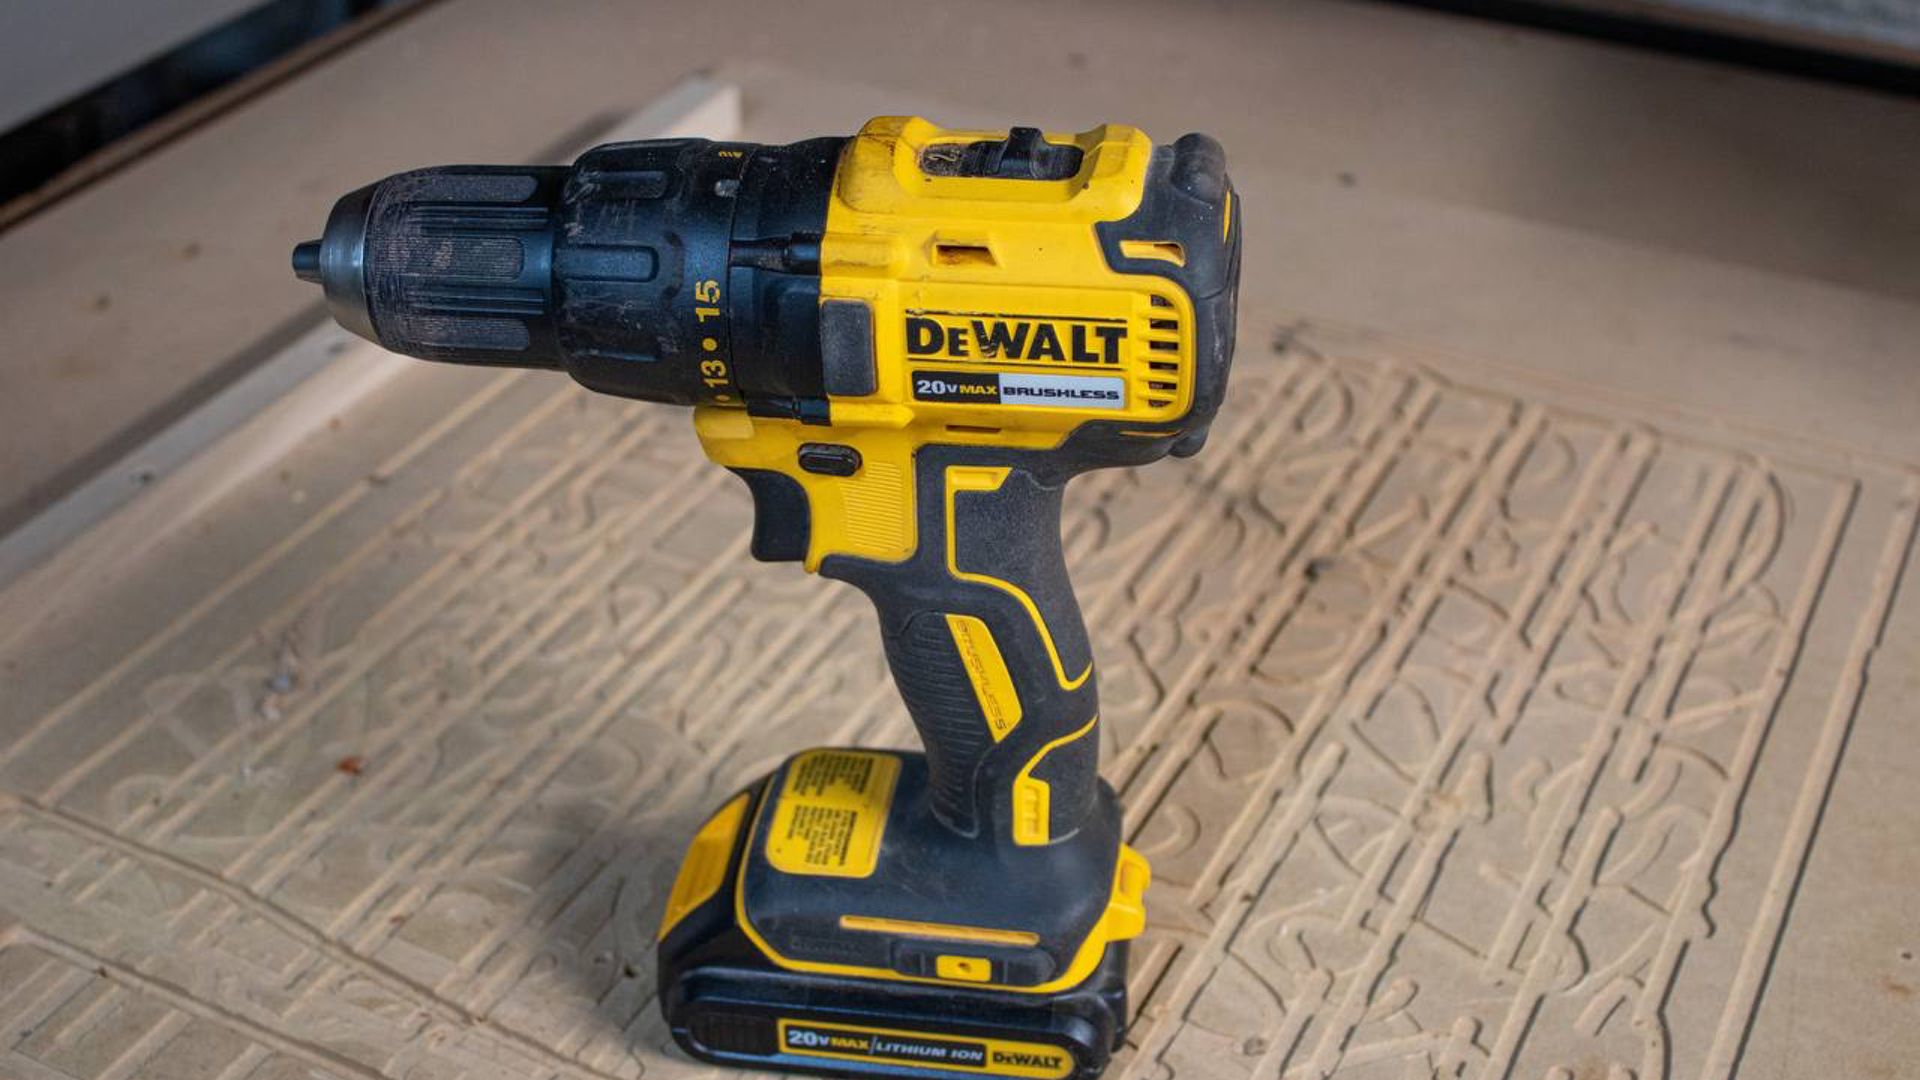 A DeWalt brushless, cordless drill sitting on a workshop table